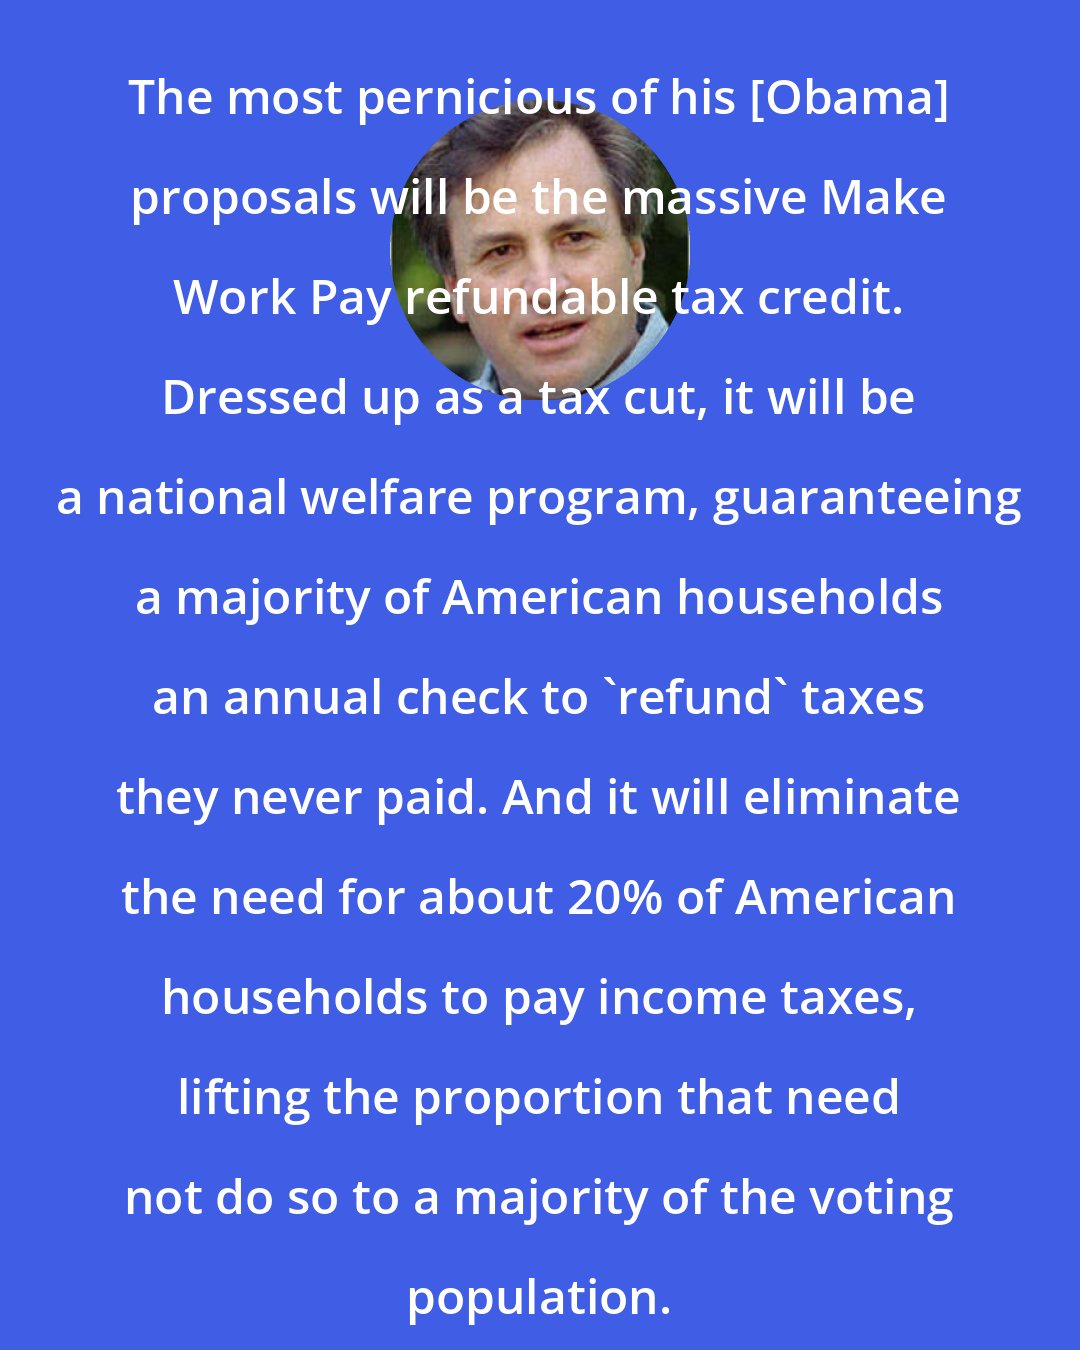 Dick Morris: The most pernicious of his [Obama] proposals will be the massive Make Work Pay refundable tax credit. Dressed up as a tax cut, it will be a national welfare program, guaranteeing a majority of American households an annual check to 'refund' taxes they never paid. And it will eliminate the need for about 20% of American households to pay income taxes, lifting the proportion that need not do so to a majority of the voting population.